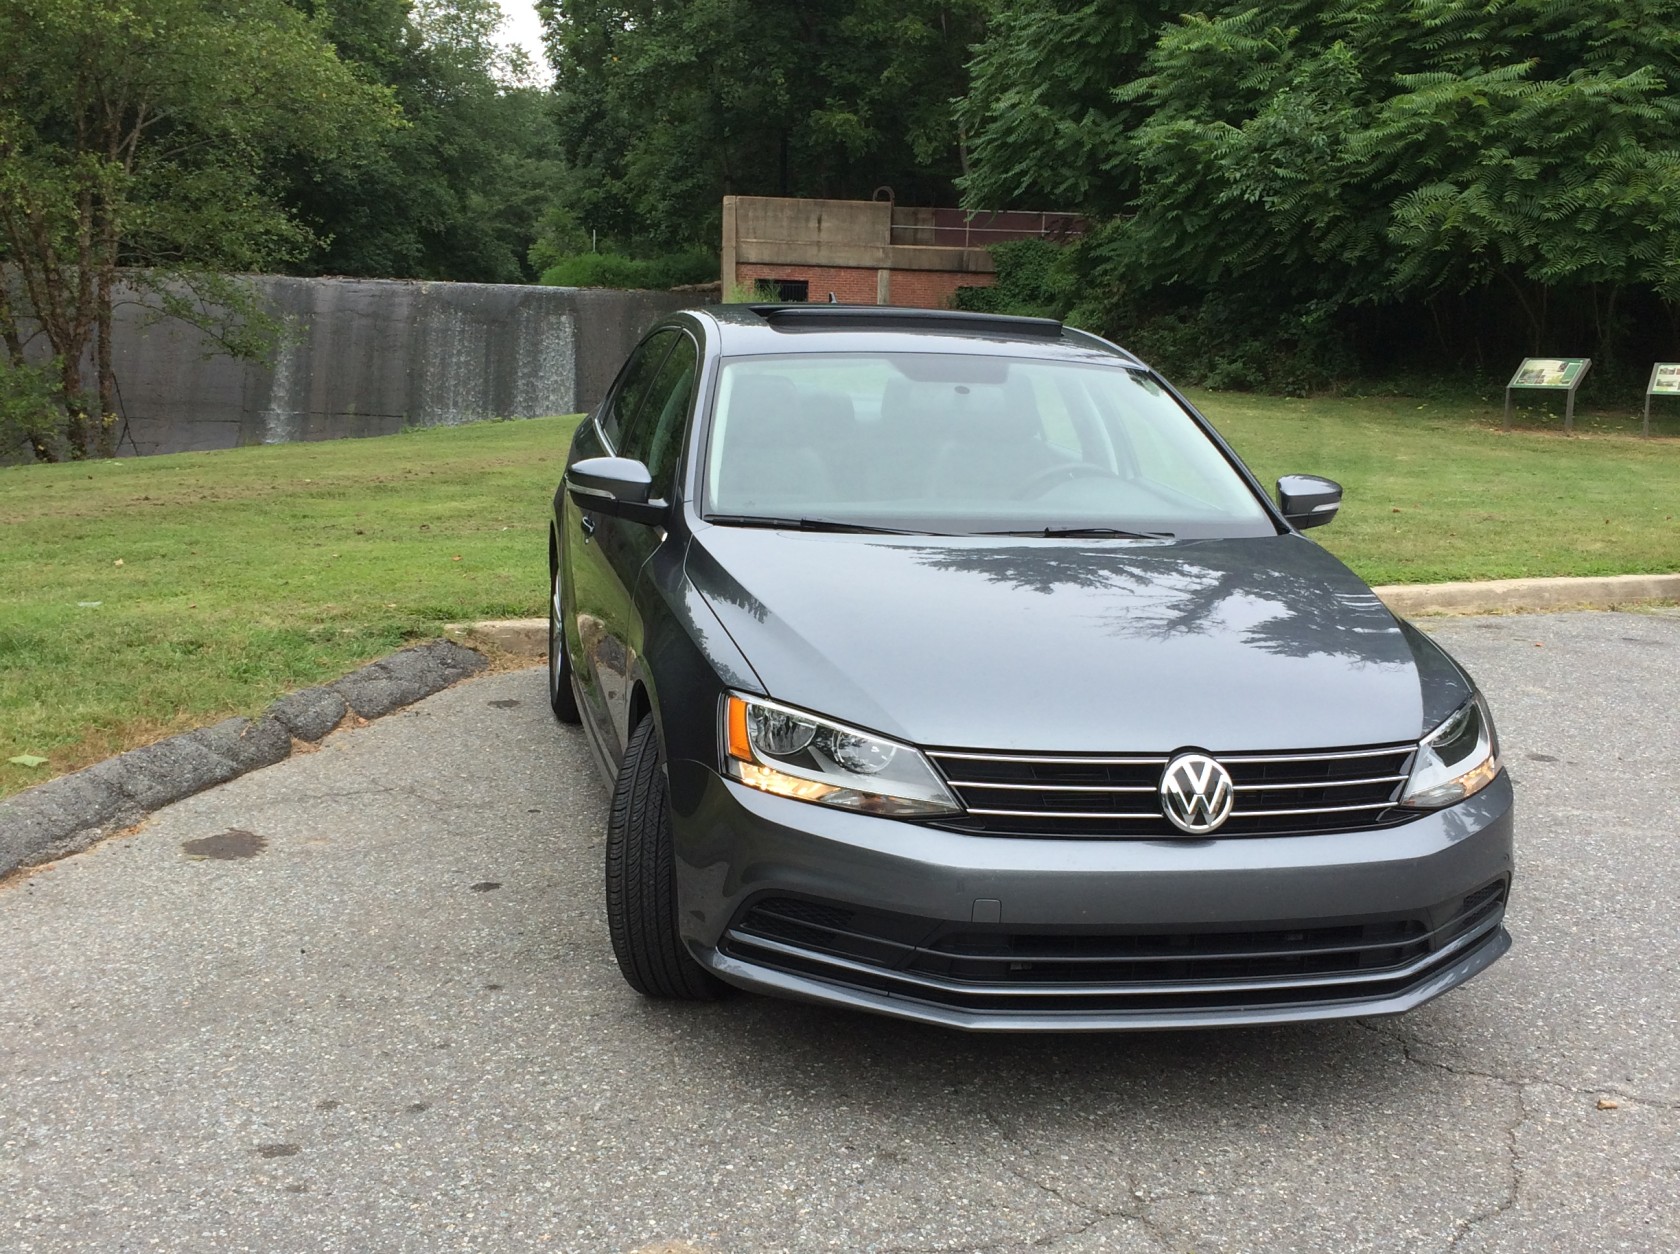 At first glance, you might say it looks like the last Jetta -- but there's a more subtle rounding to soften the look. (WTOP/Mike Parris)